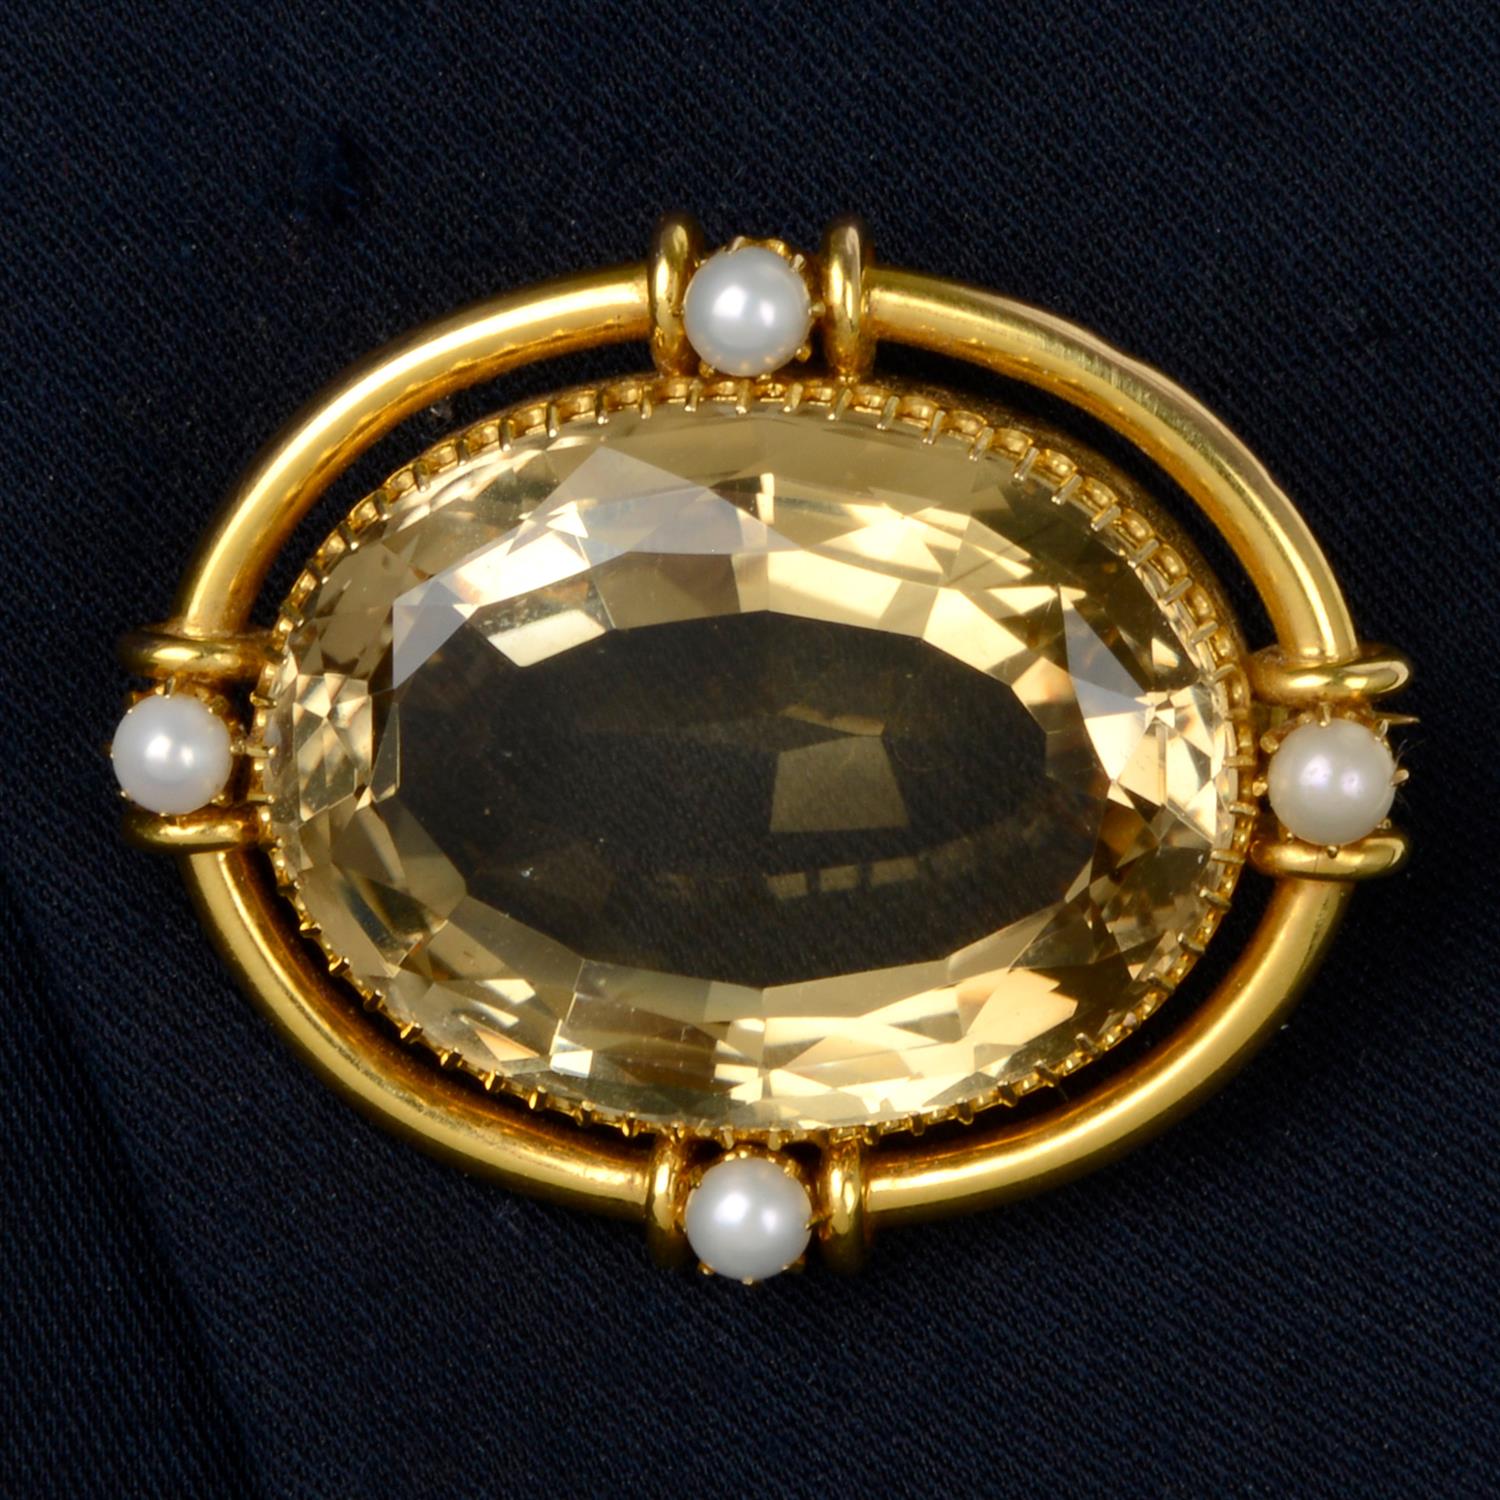 Late 19th century 18ct gold citrine and split pearl brooch